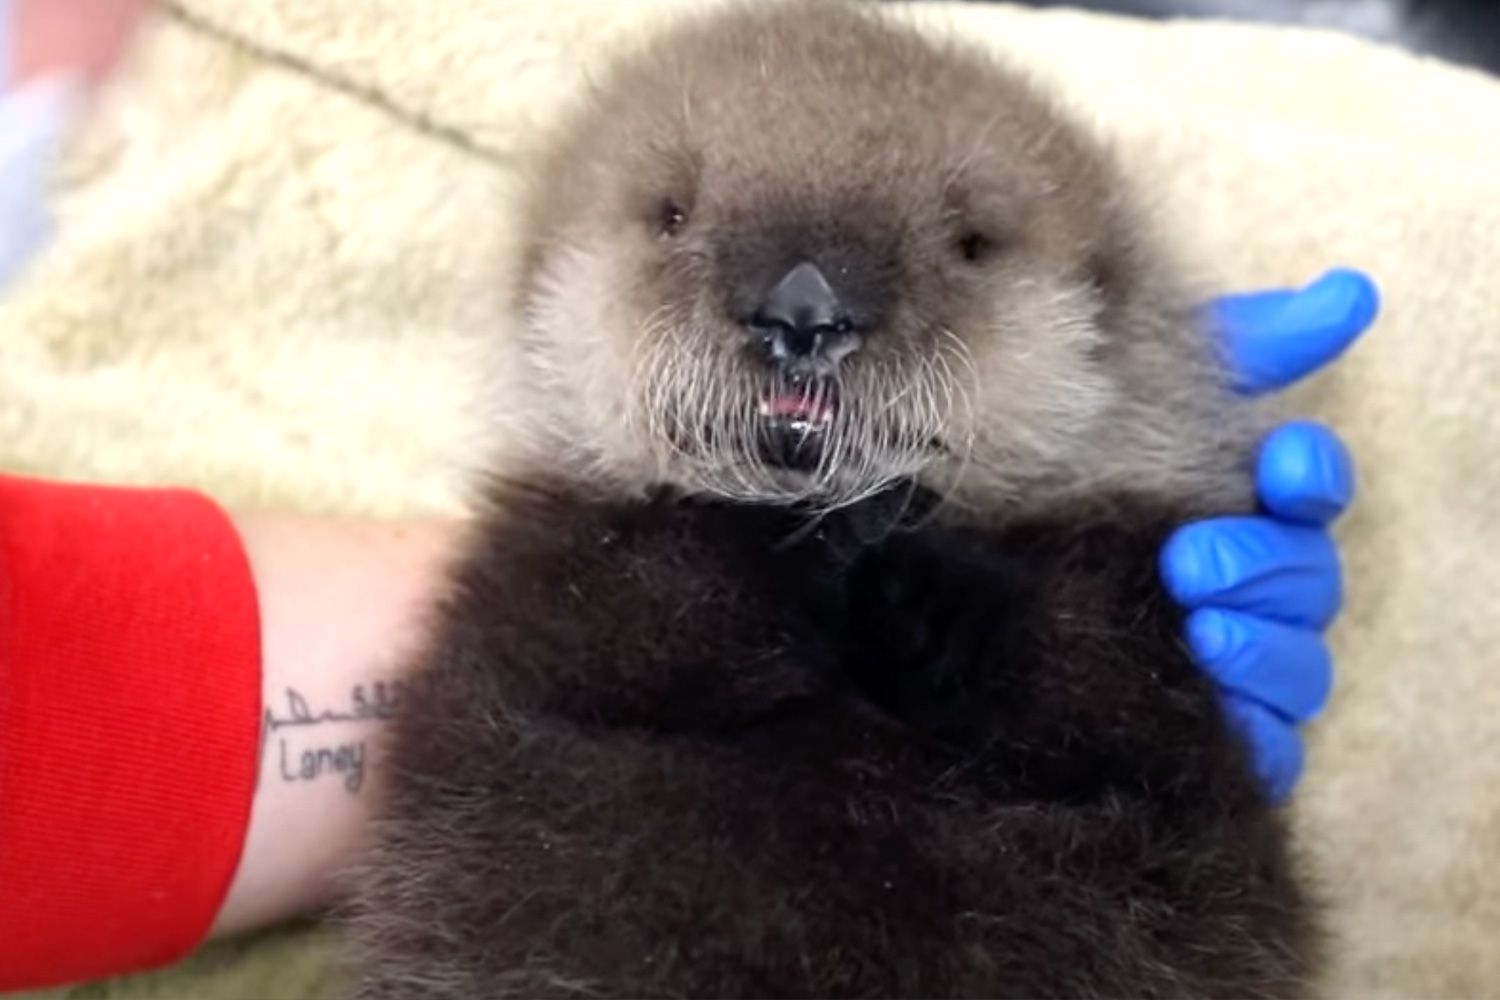 Baby otter at the Alaska SeaLife Center after losing mother in orca whale attack.